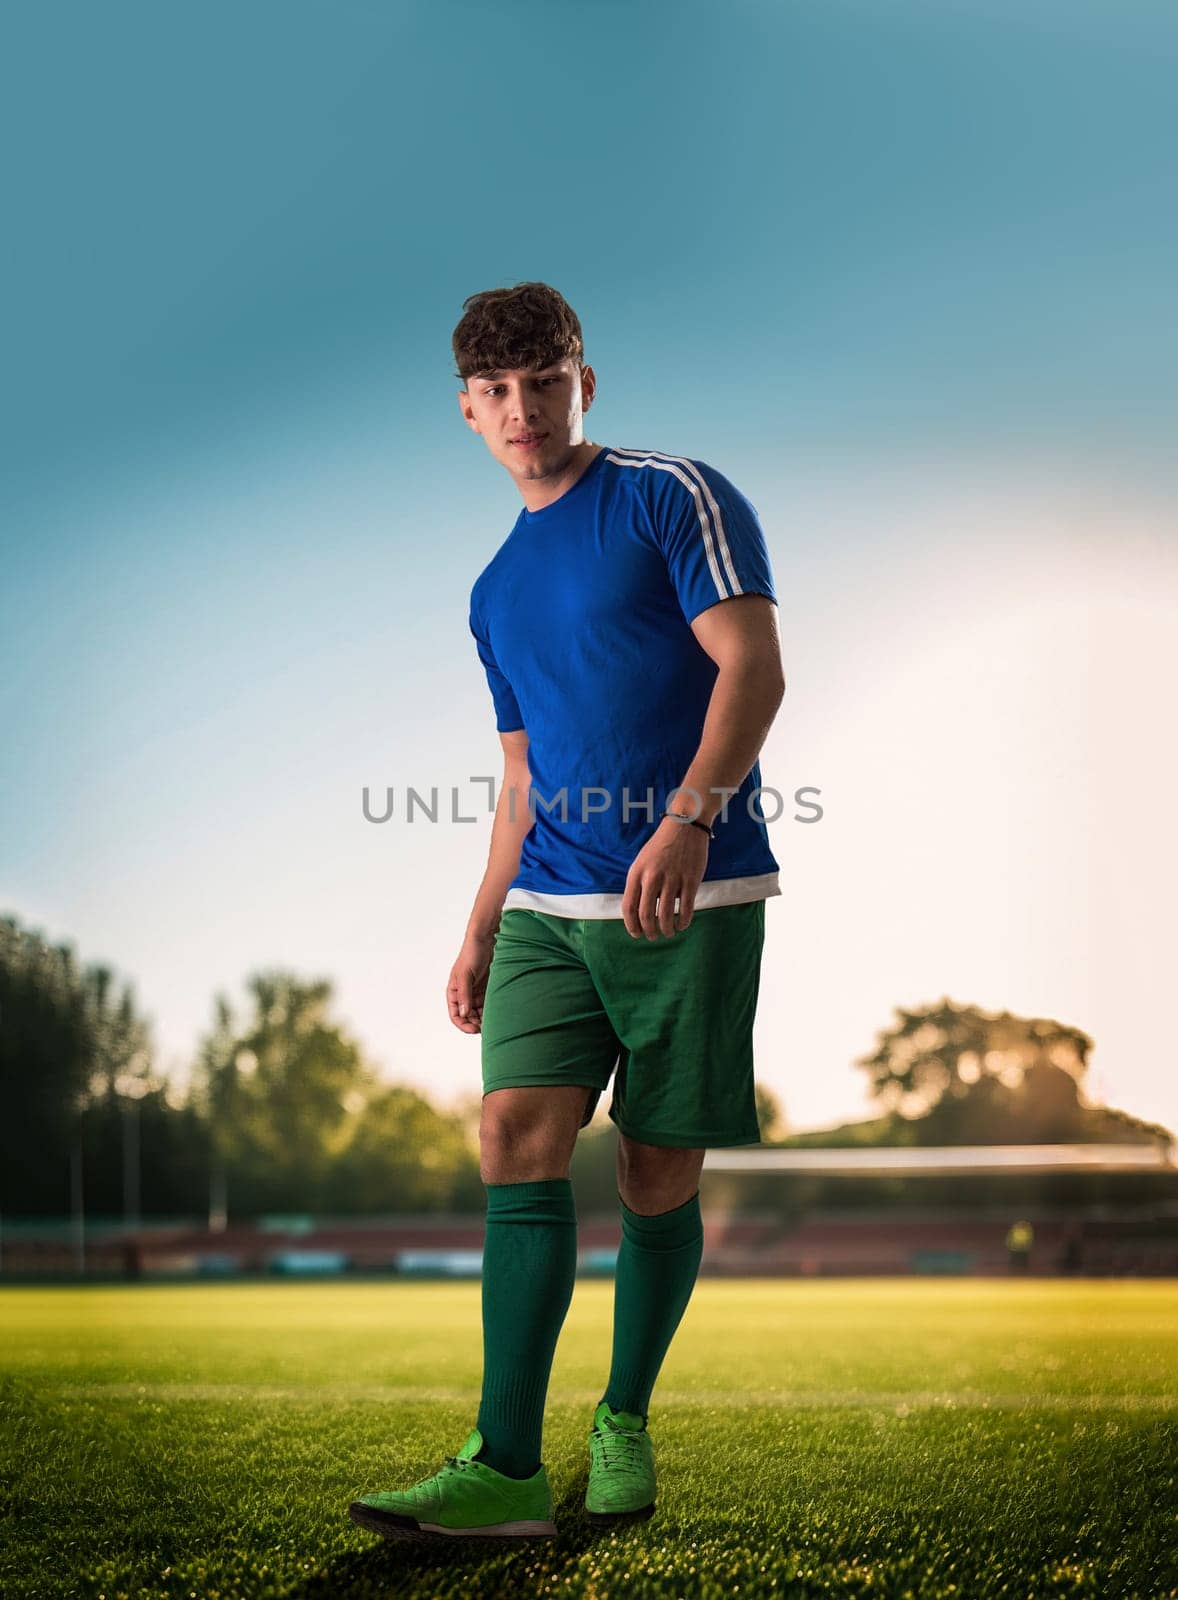 A man in a blue shirt and green shorts standing on a soccer field